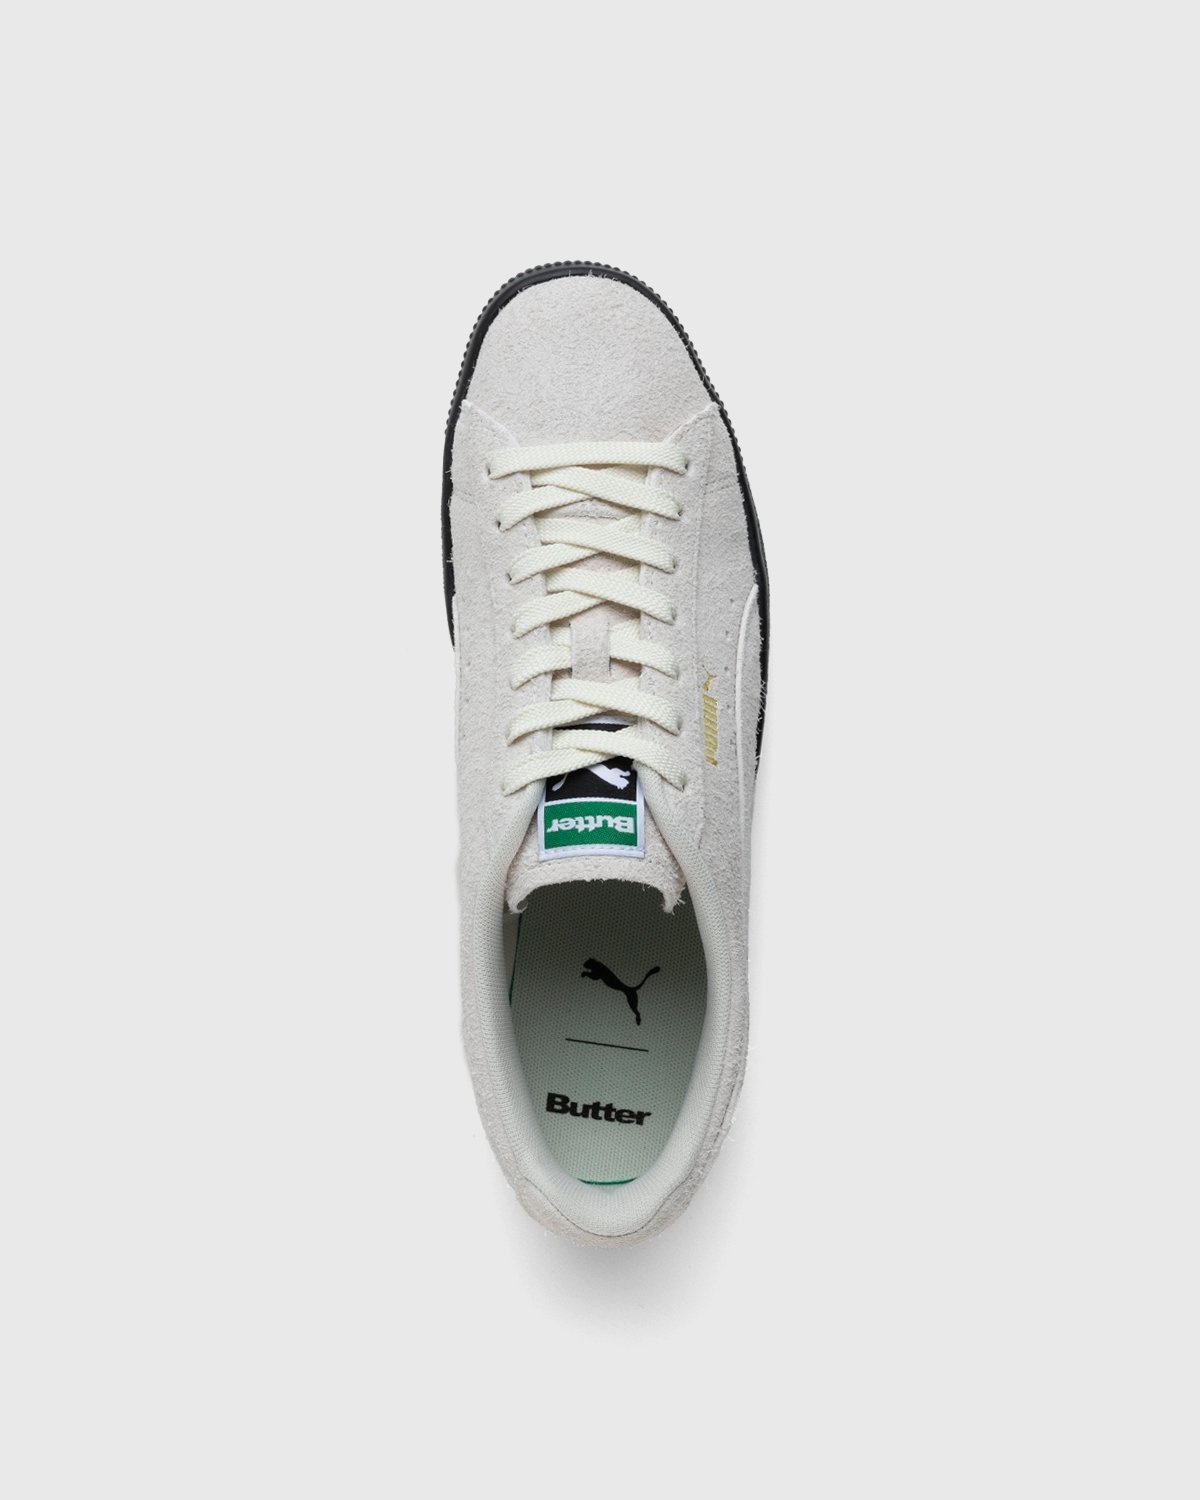 Puma x Butter Goods – Suede VTG Whisper White/Puma Black - Sneakers - Green - Image 6